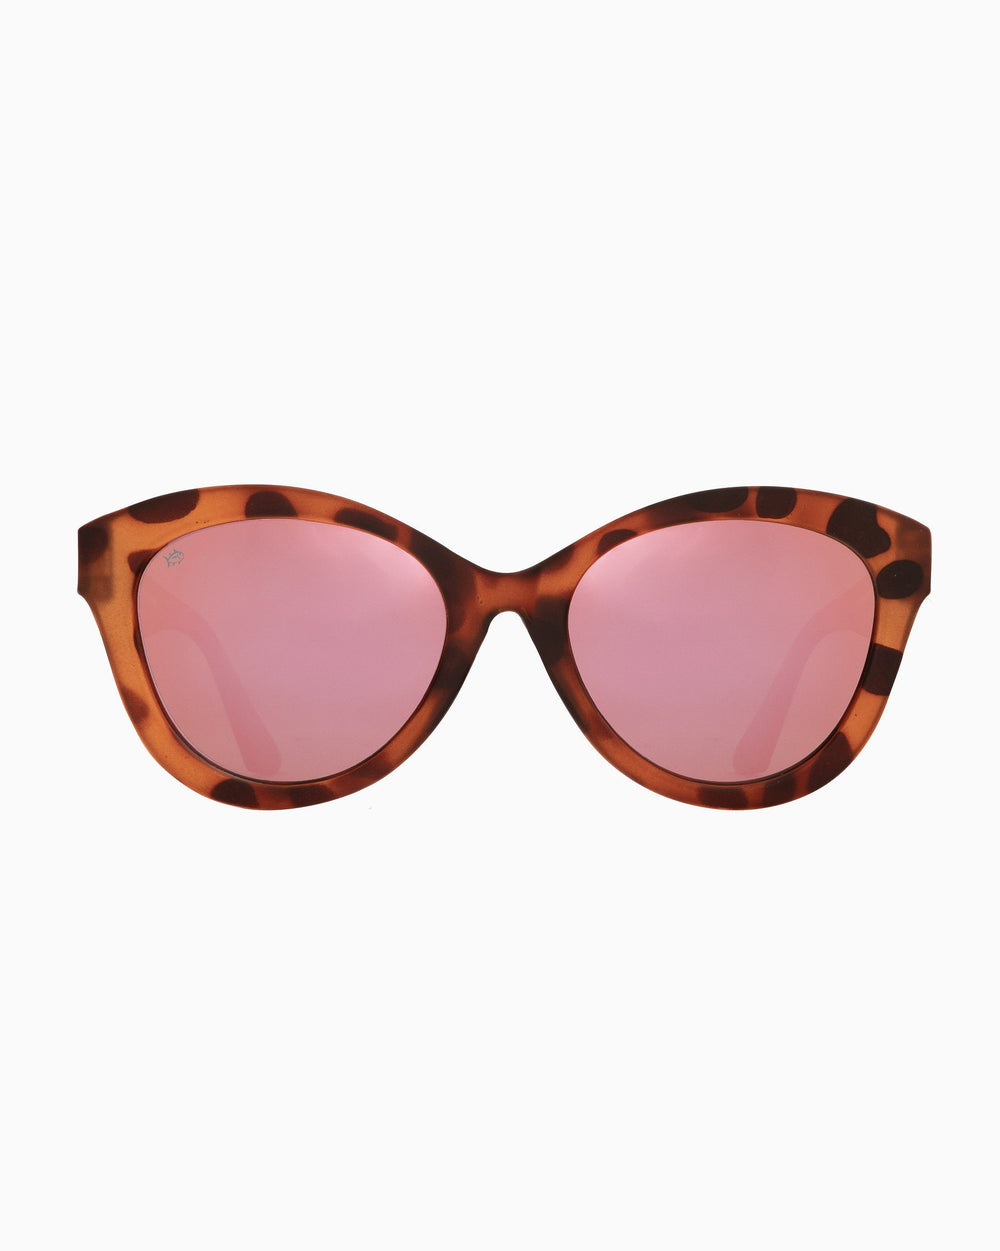 The front of the Women's Rheos Faris Sunglasses by Southern Tide - Tortoise Rose